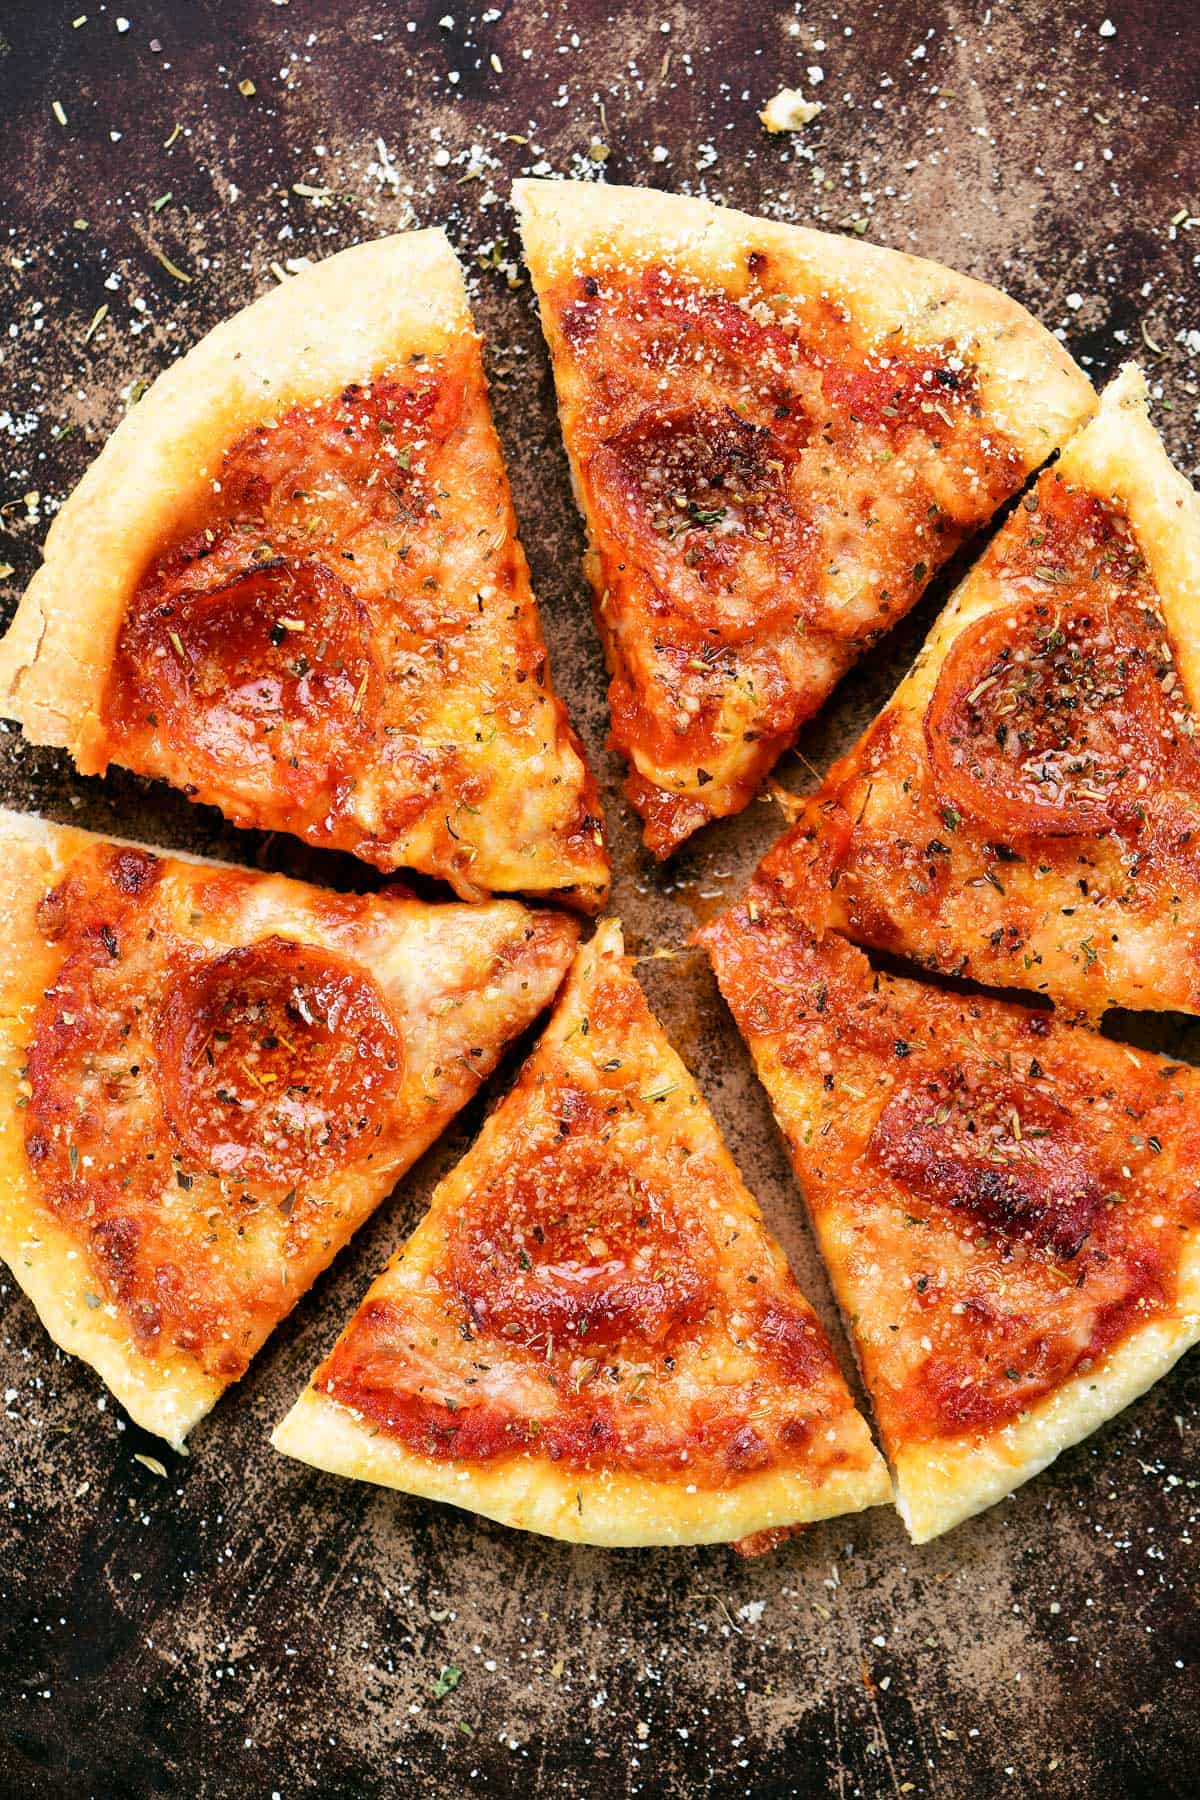 Homemade air fryer pizza cut into six slices.